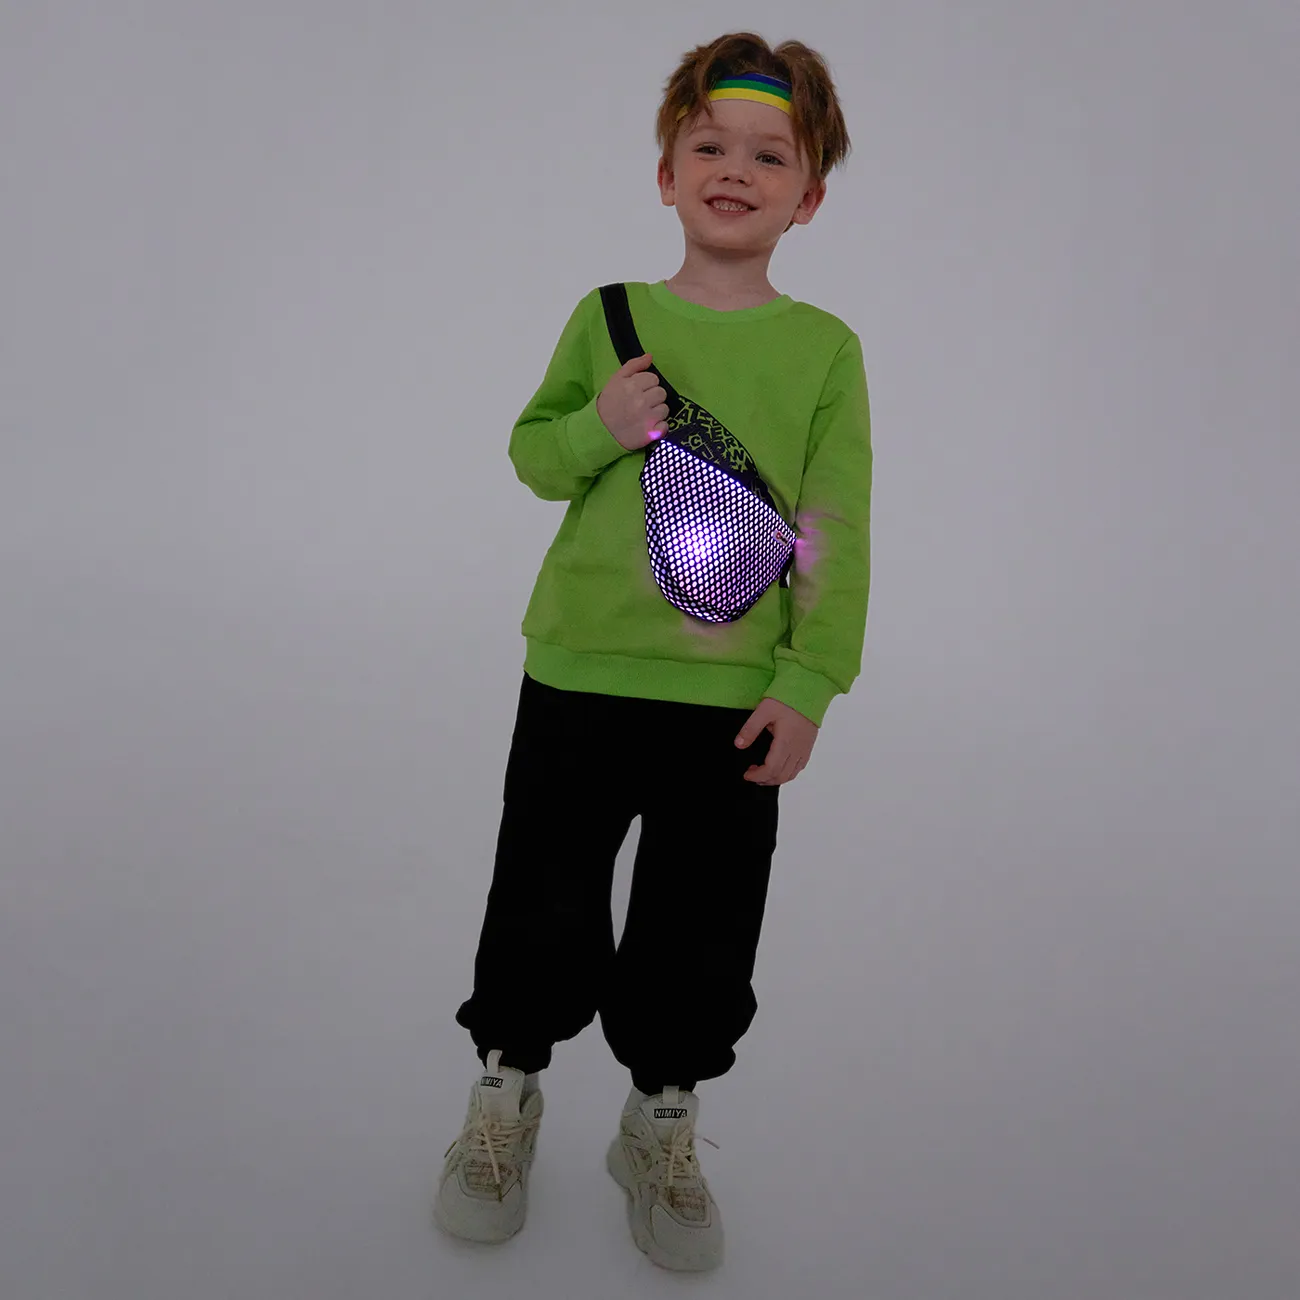 Go-Glow Illuminating Sweatshirt with Light Up Removable Bag Including Controller (Built-In Battery) SpringGreen big image 1